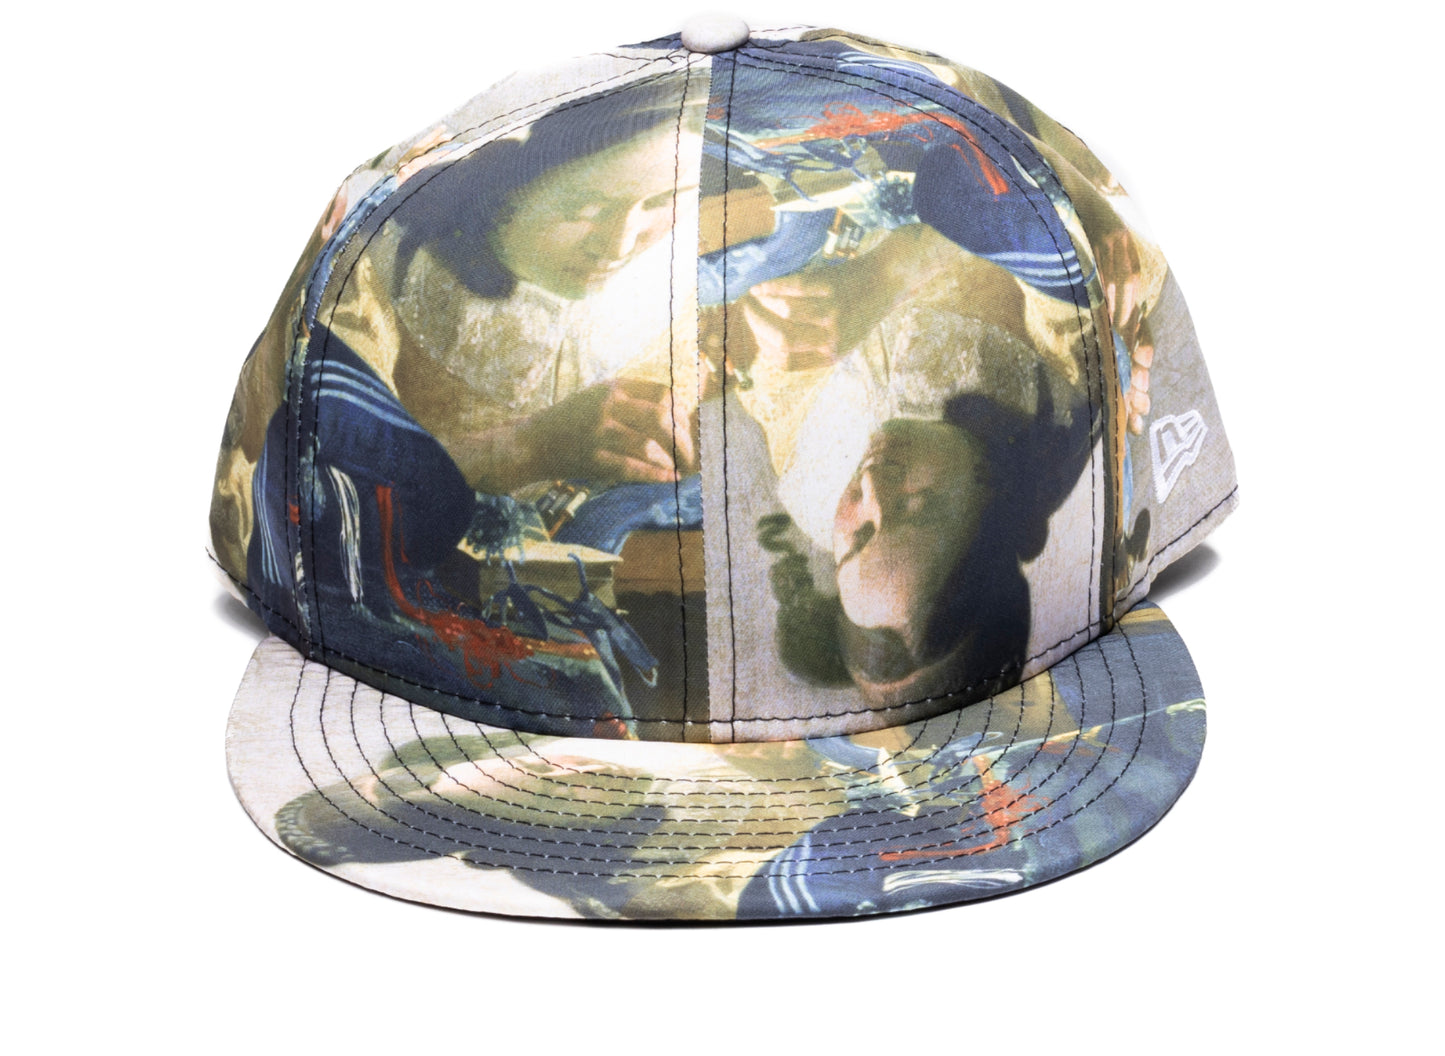 New Era Louvre All Over Print 59Fifty Hat